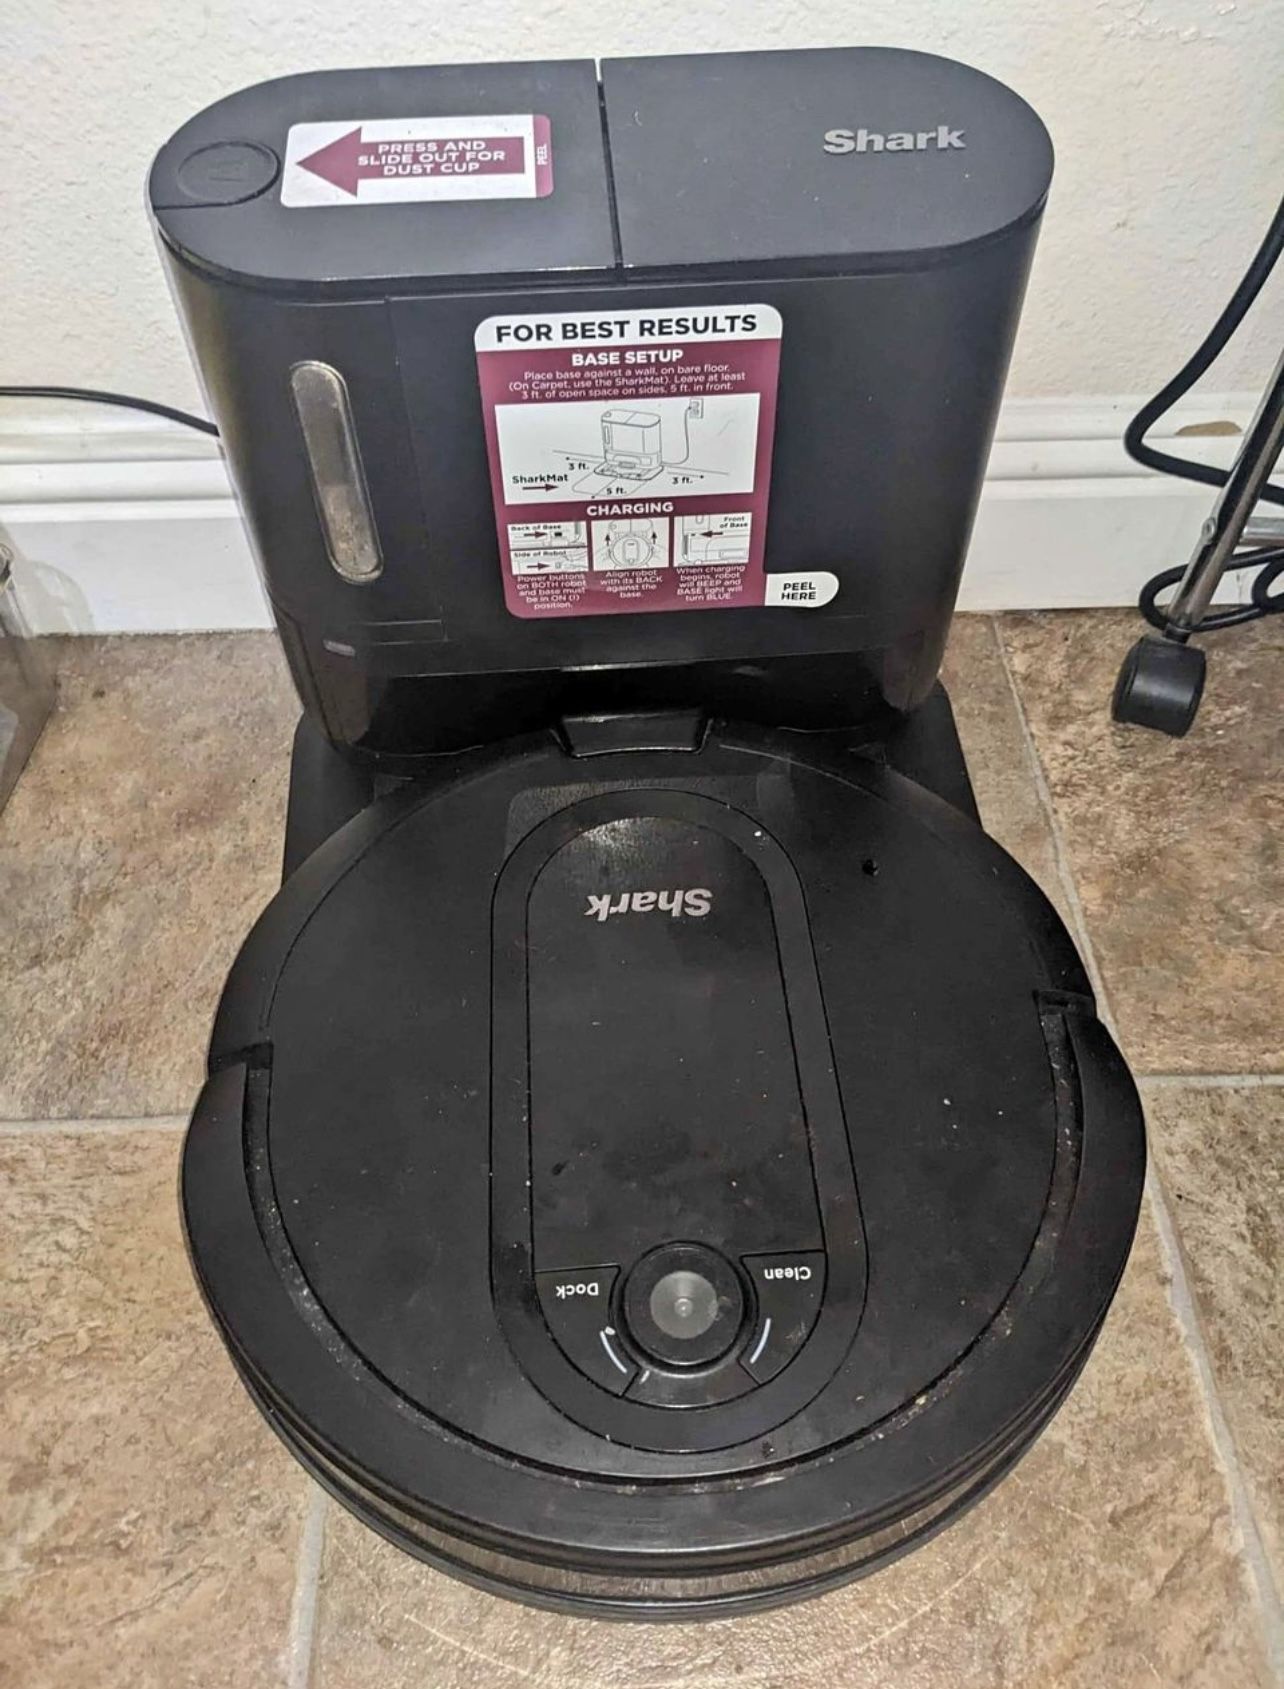 Shark IQ Robot Vacuum. Self Cleaning With Base